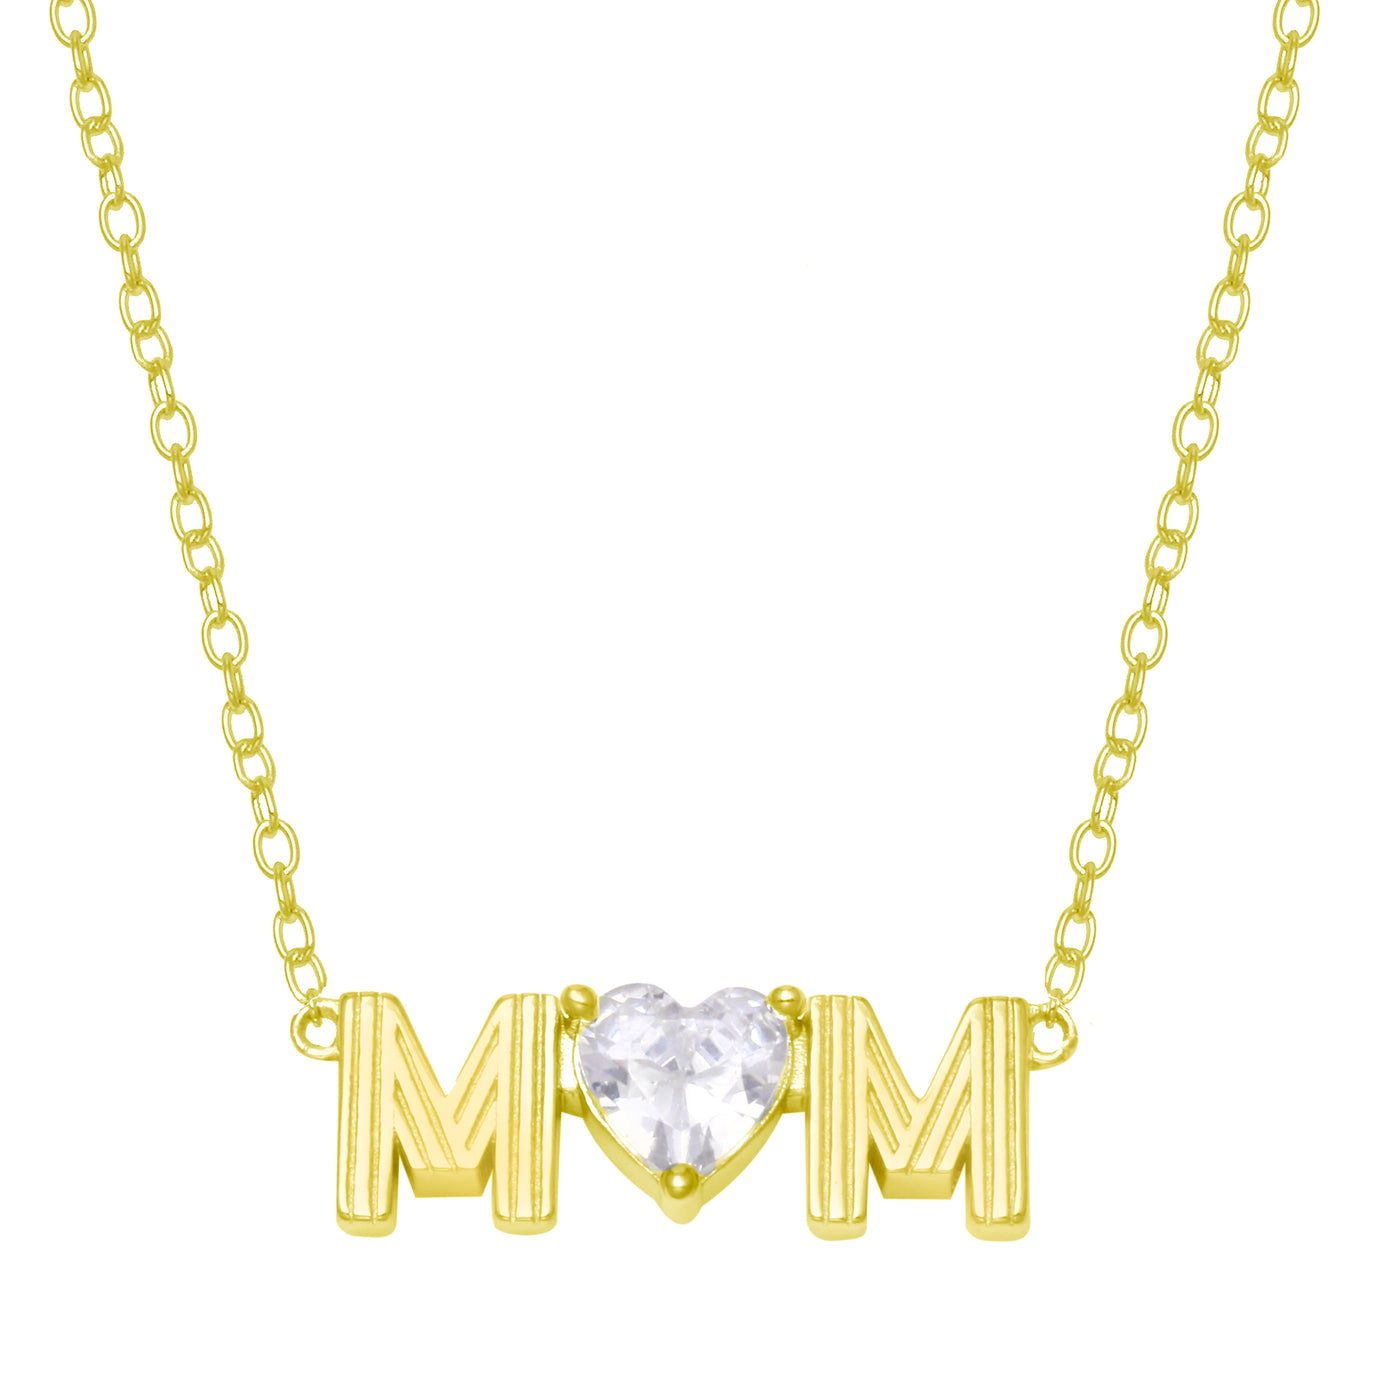 MOM Fluted Necklace